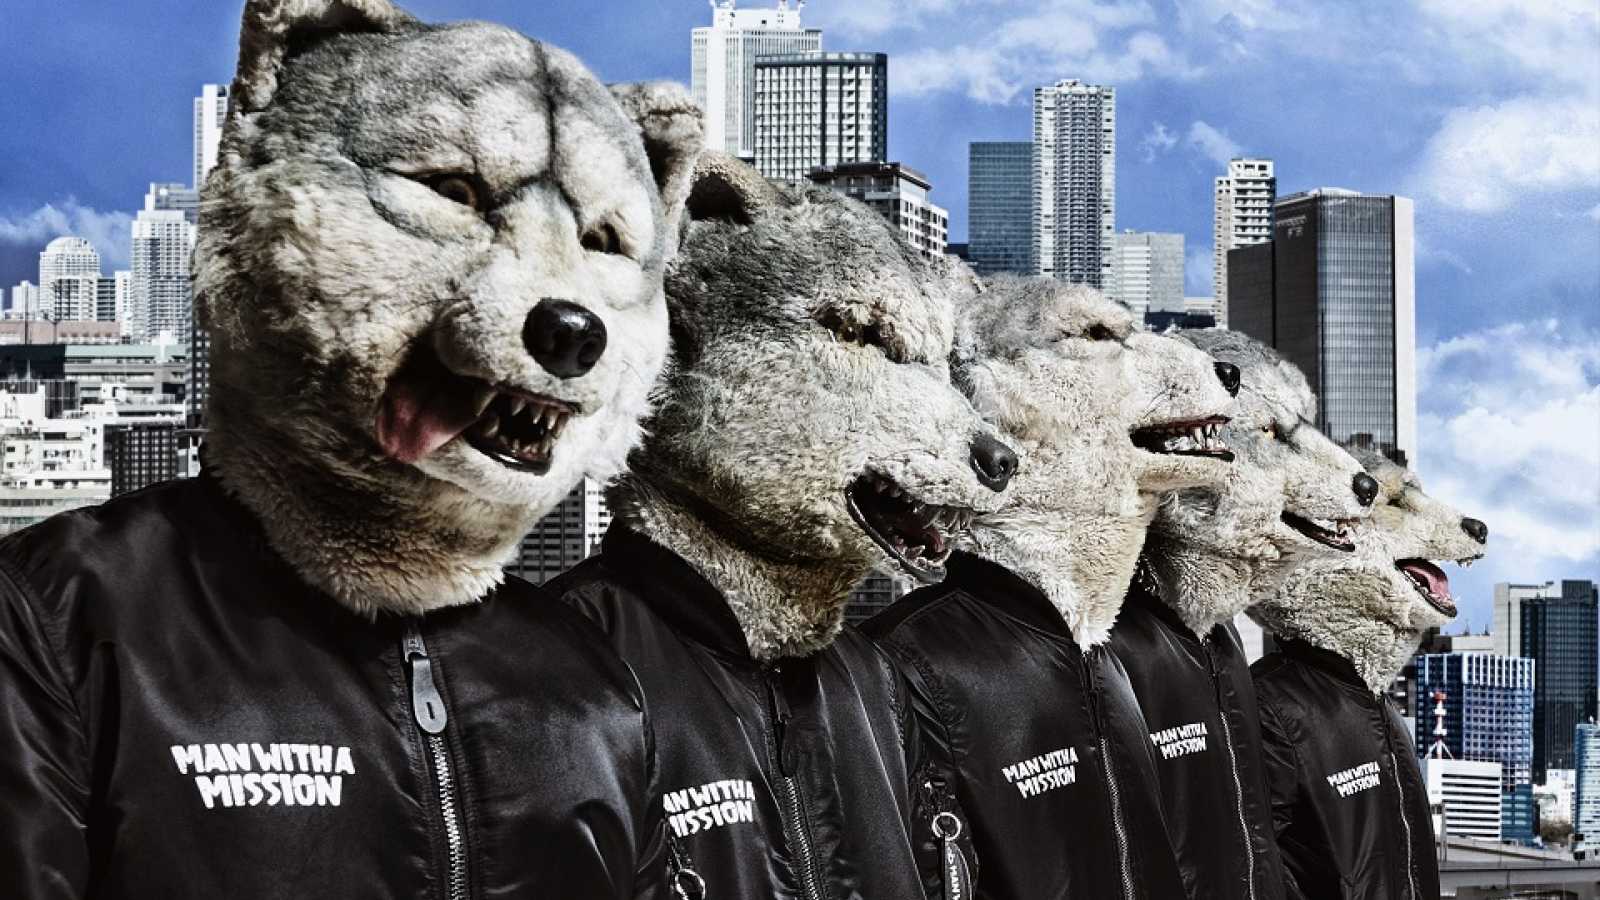 MAN WITH A MISSION anuncia planos para seu 10º aniversário © MAN WITH A MISSION. All rights reserved.